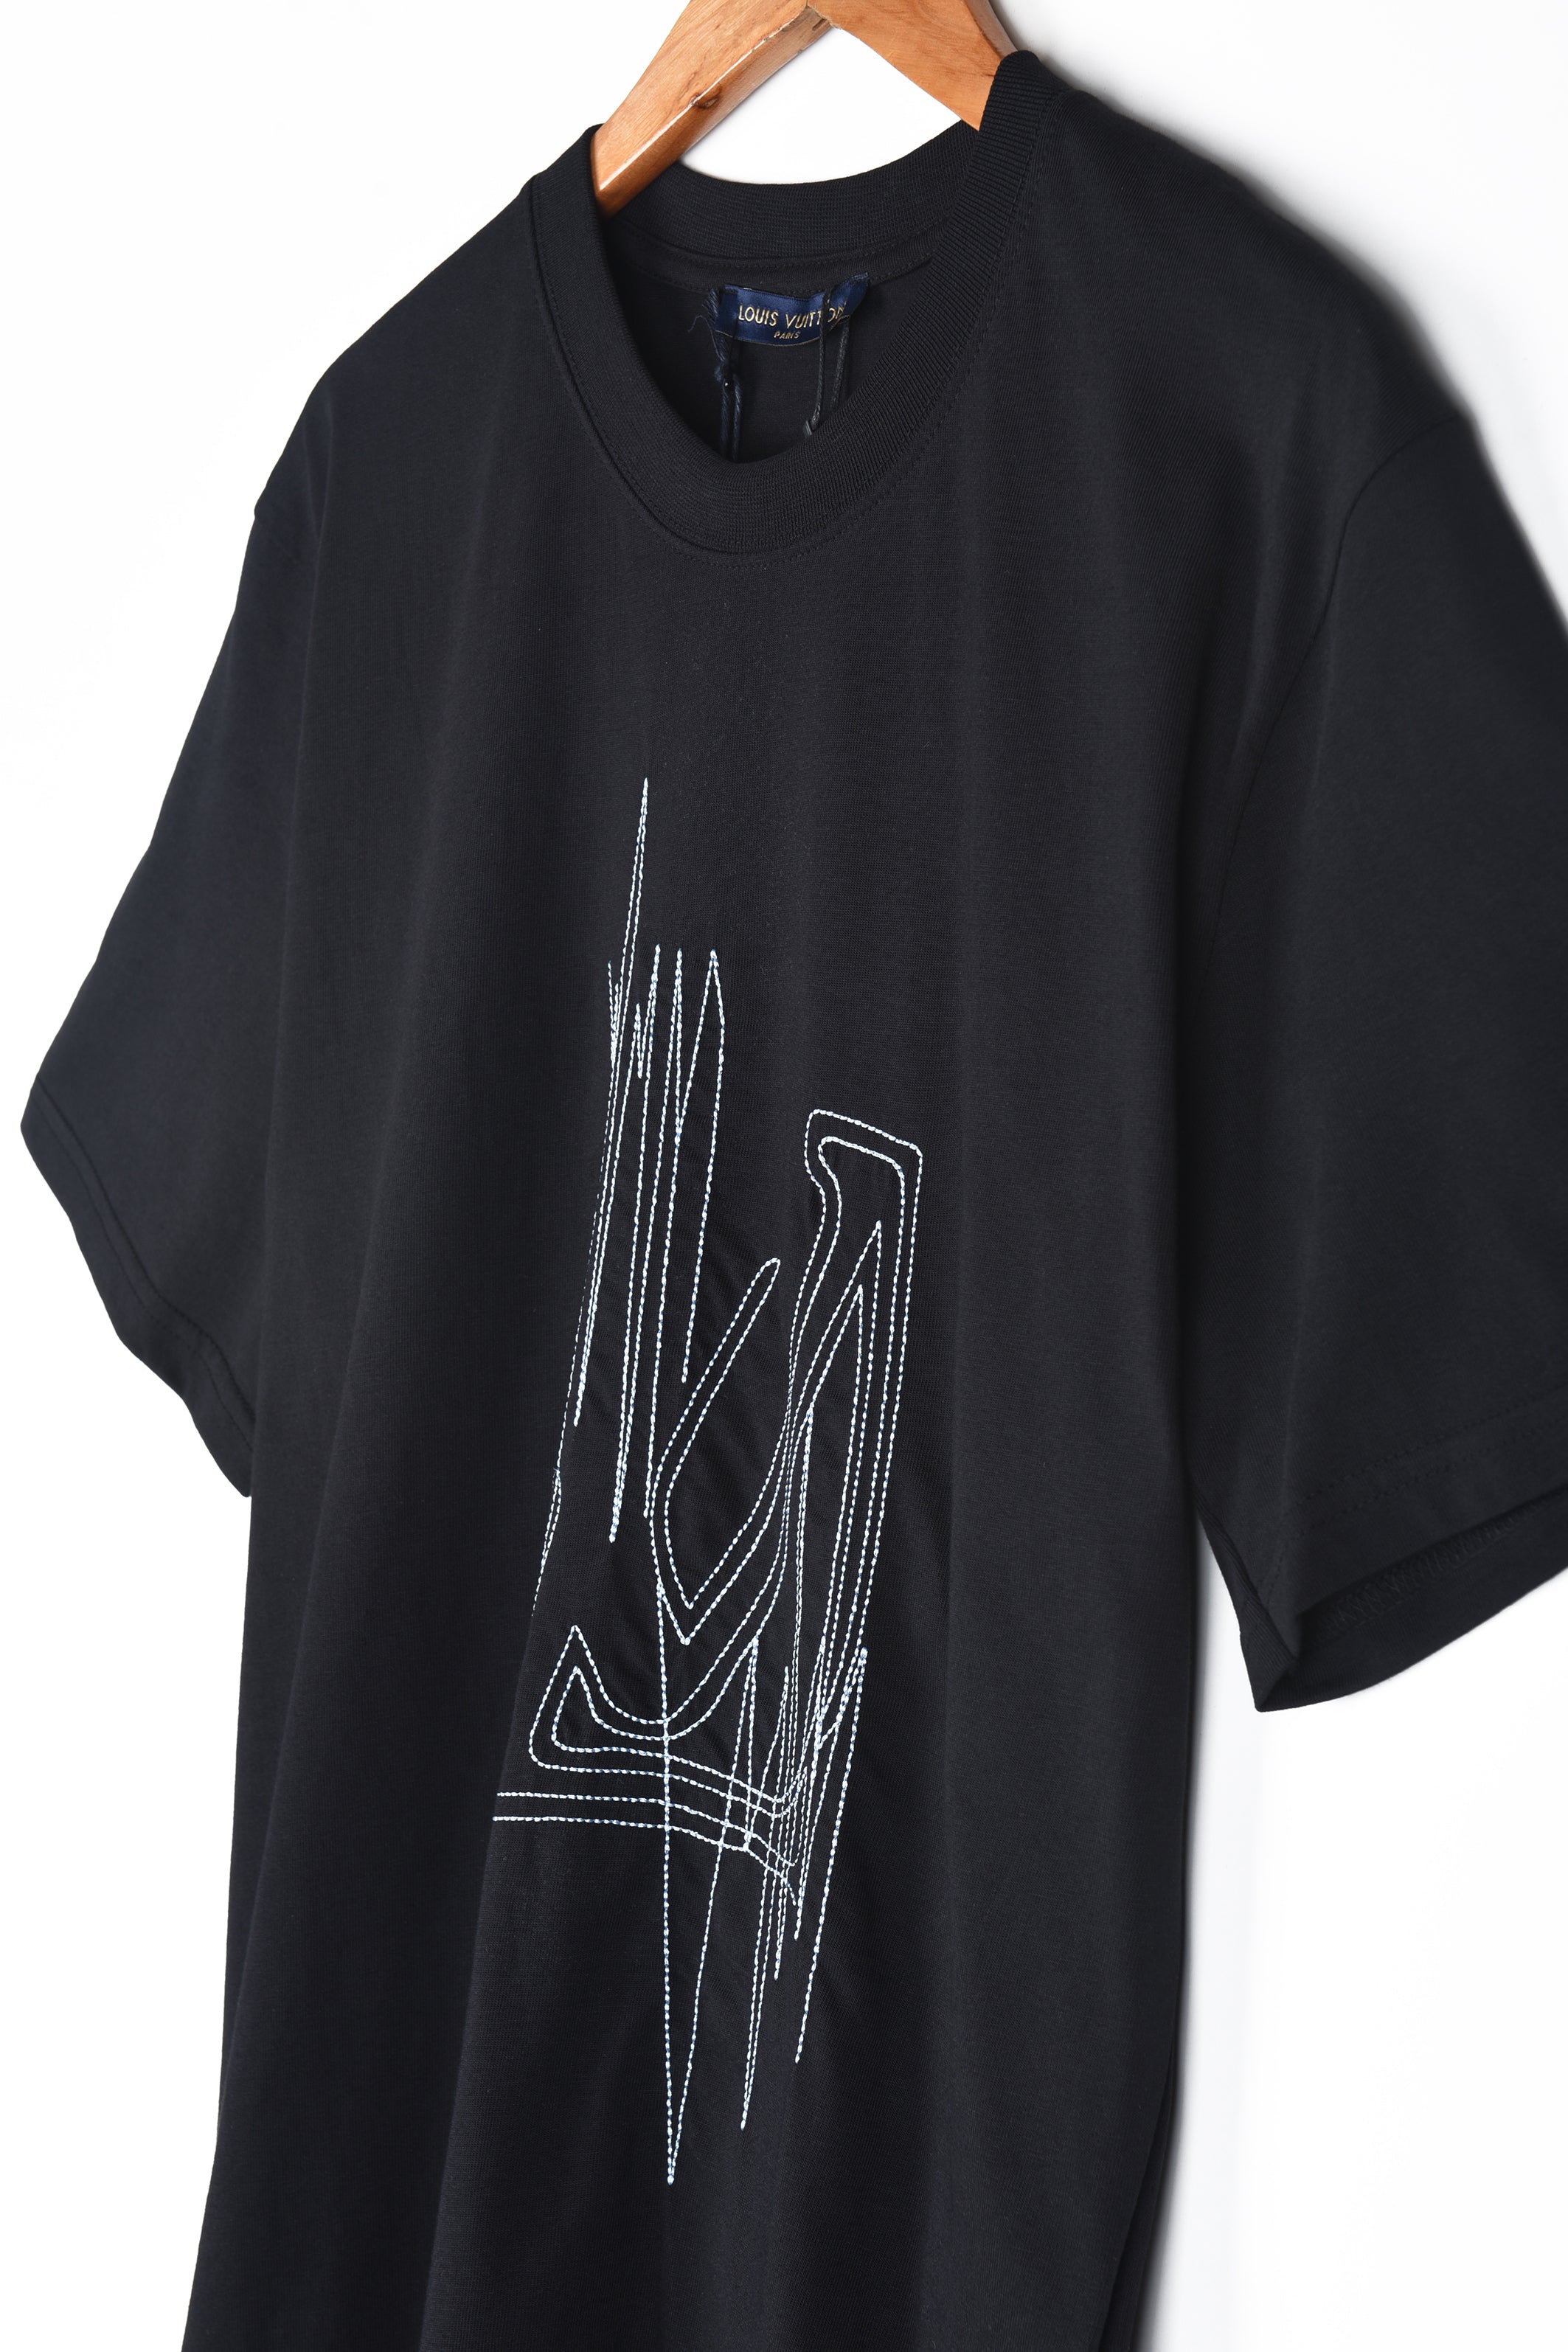 LV Frequency Graphic T-Shirt